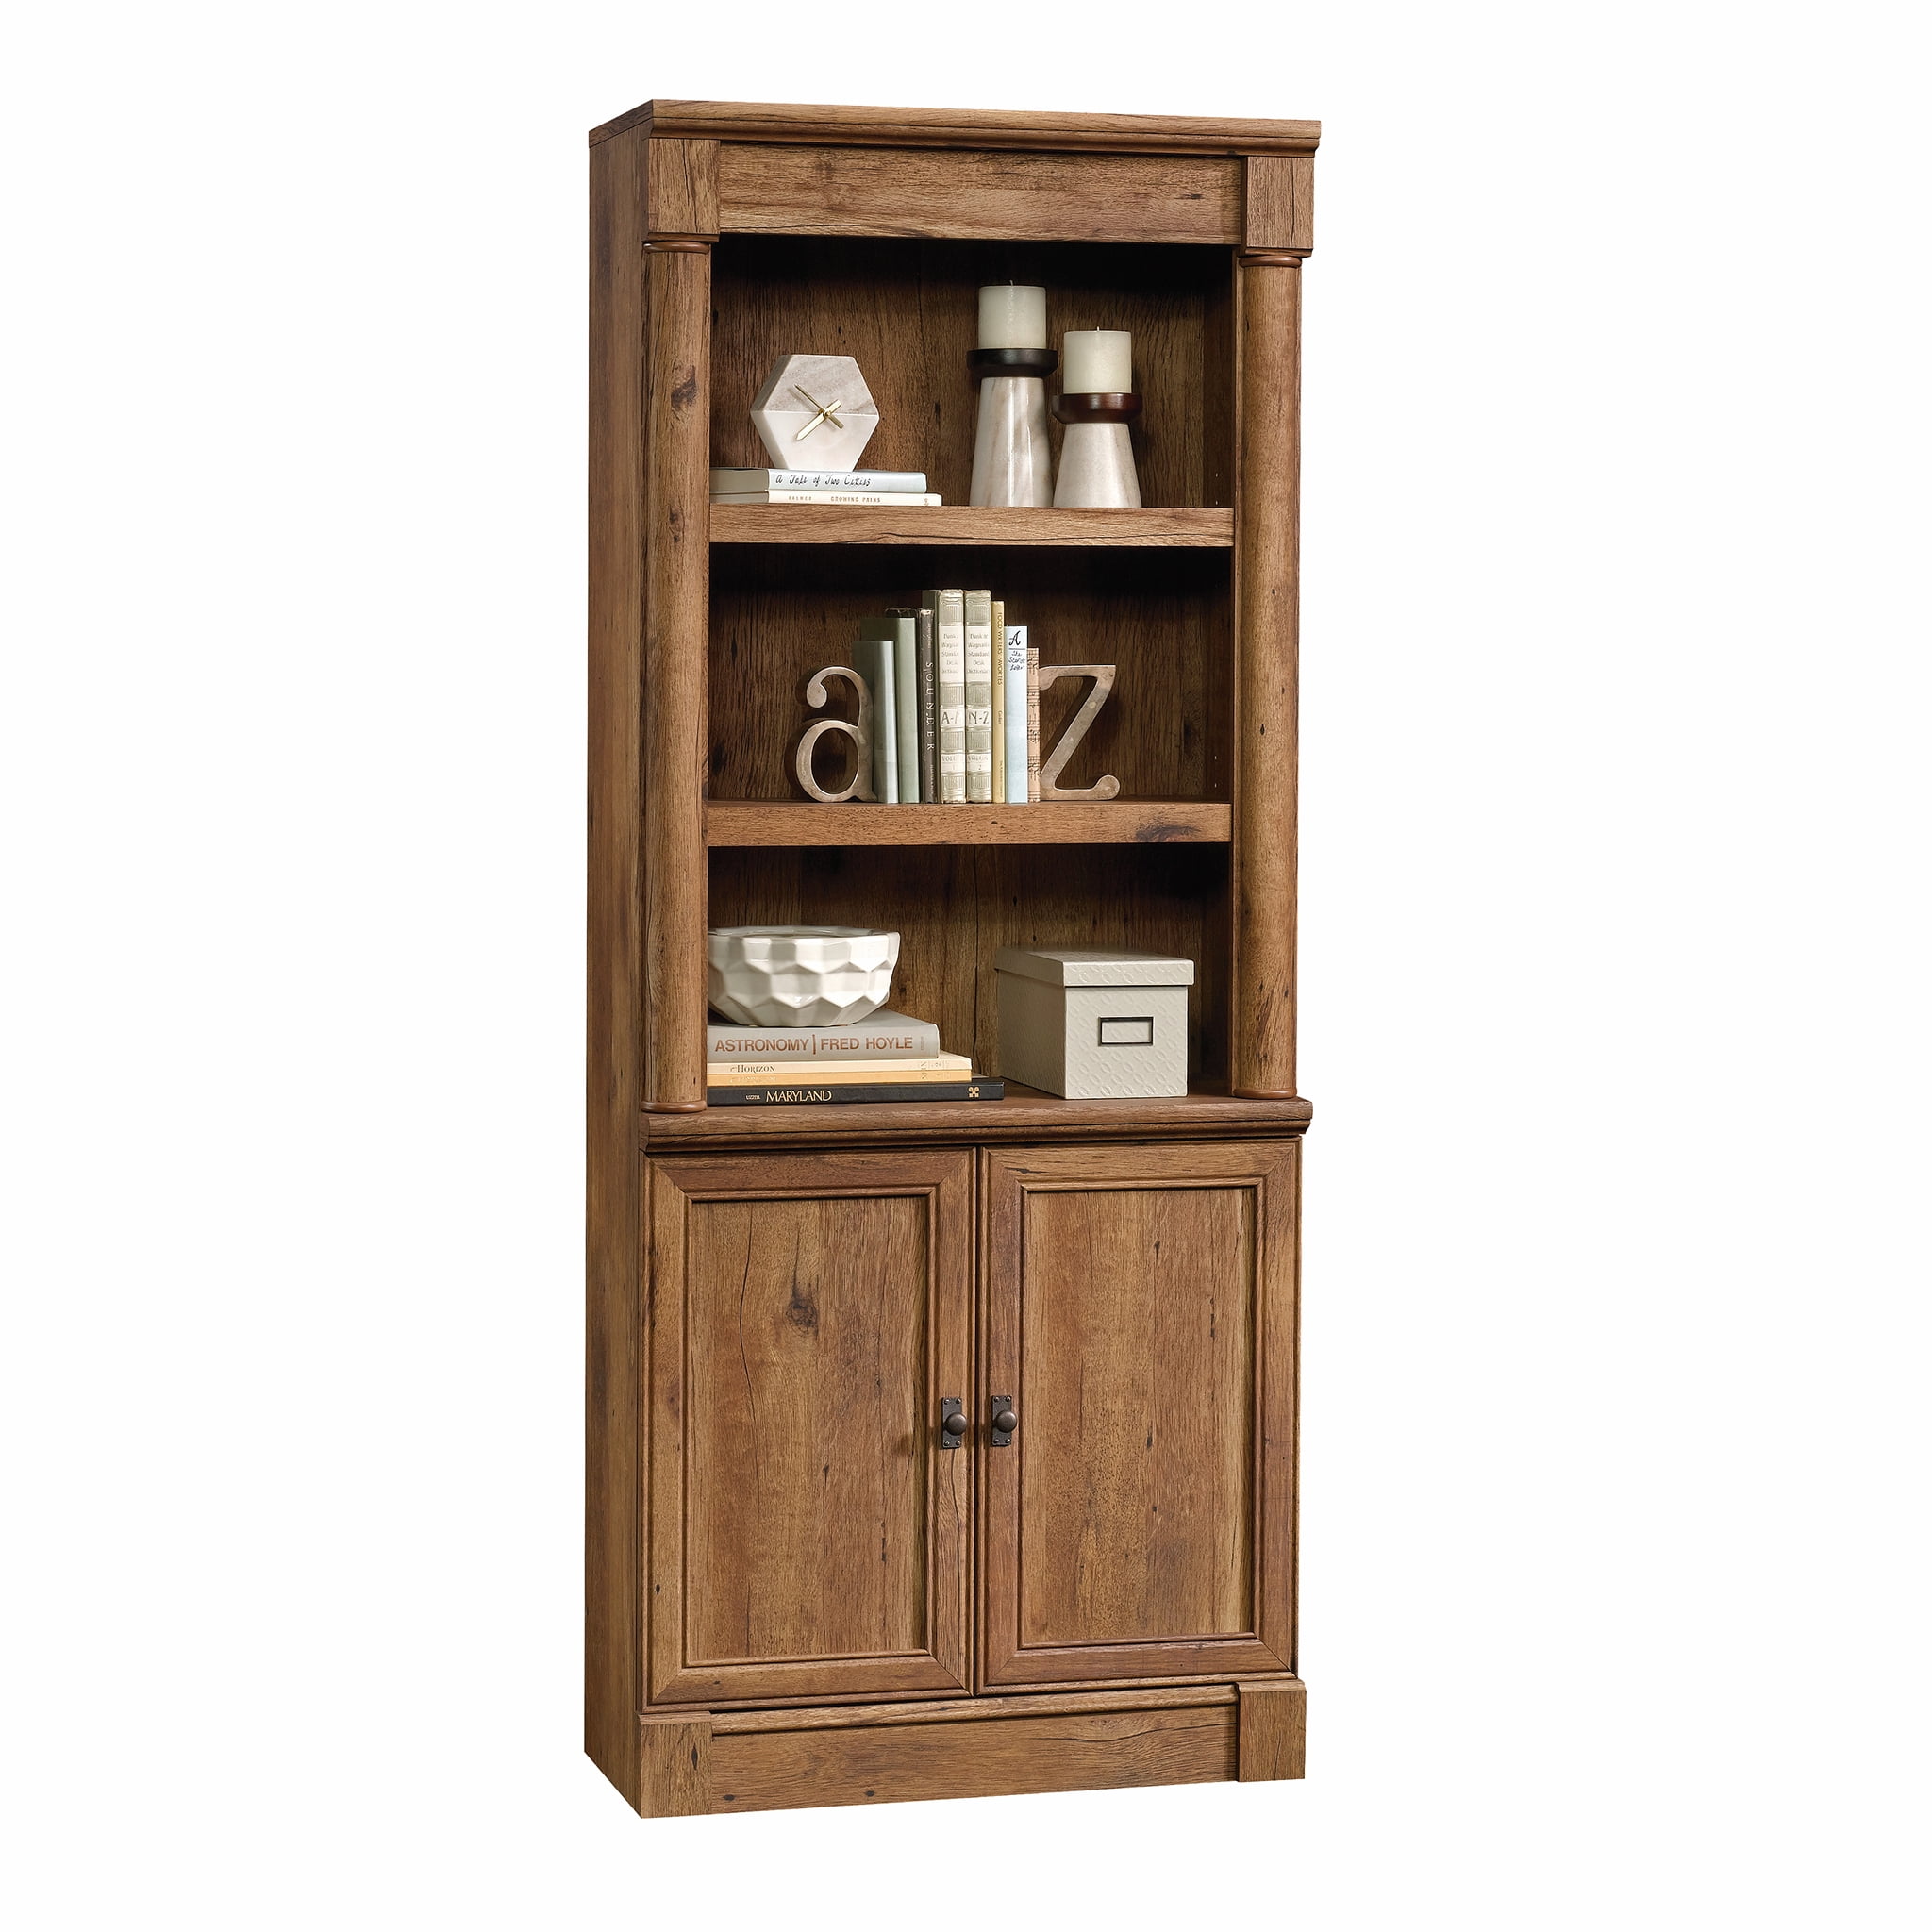 Sauder 71 Heritage Hill Library, Sauder Heritage Hill 2 Door Bookcase Classic Cherry Red